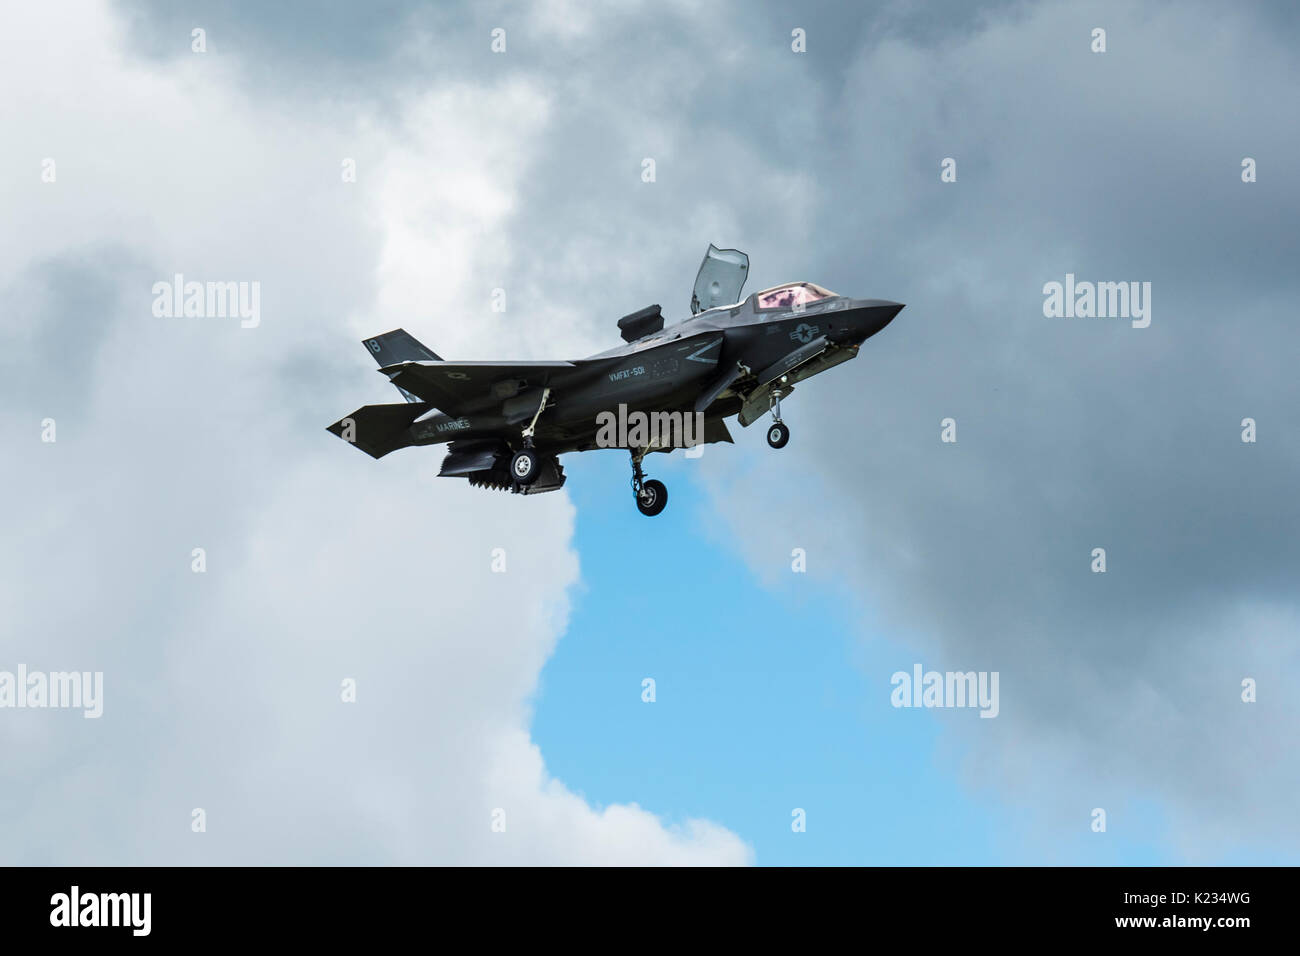 The Lockheed Martin F-35B Lightning II in Farnborough, Hampshire, UK showing off it's flexibility in the skies by hovering over the runway. Stock Photo